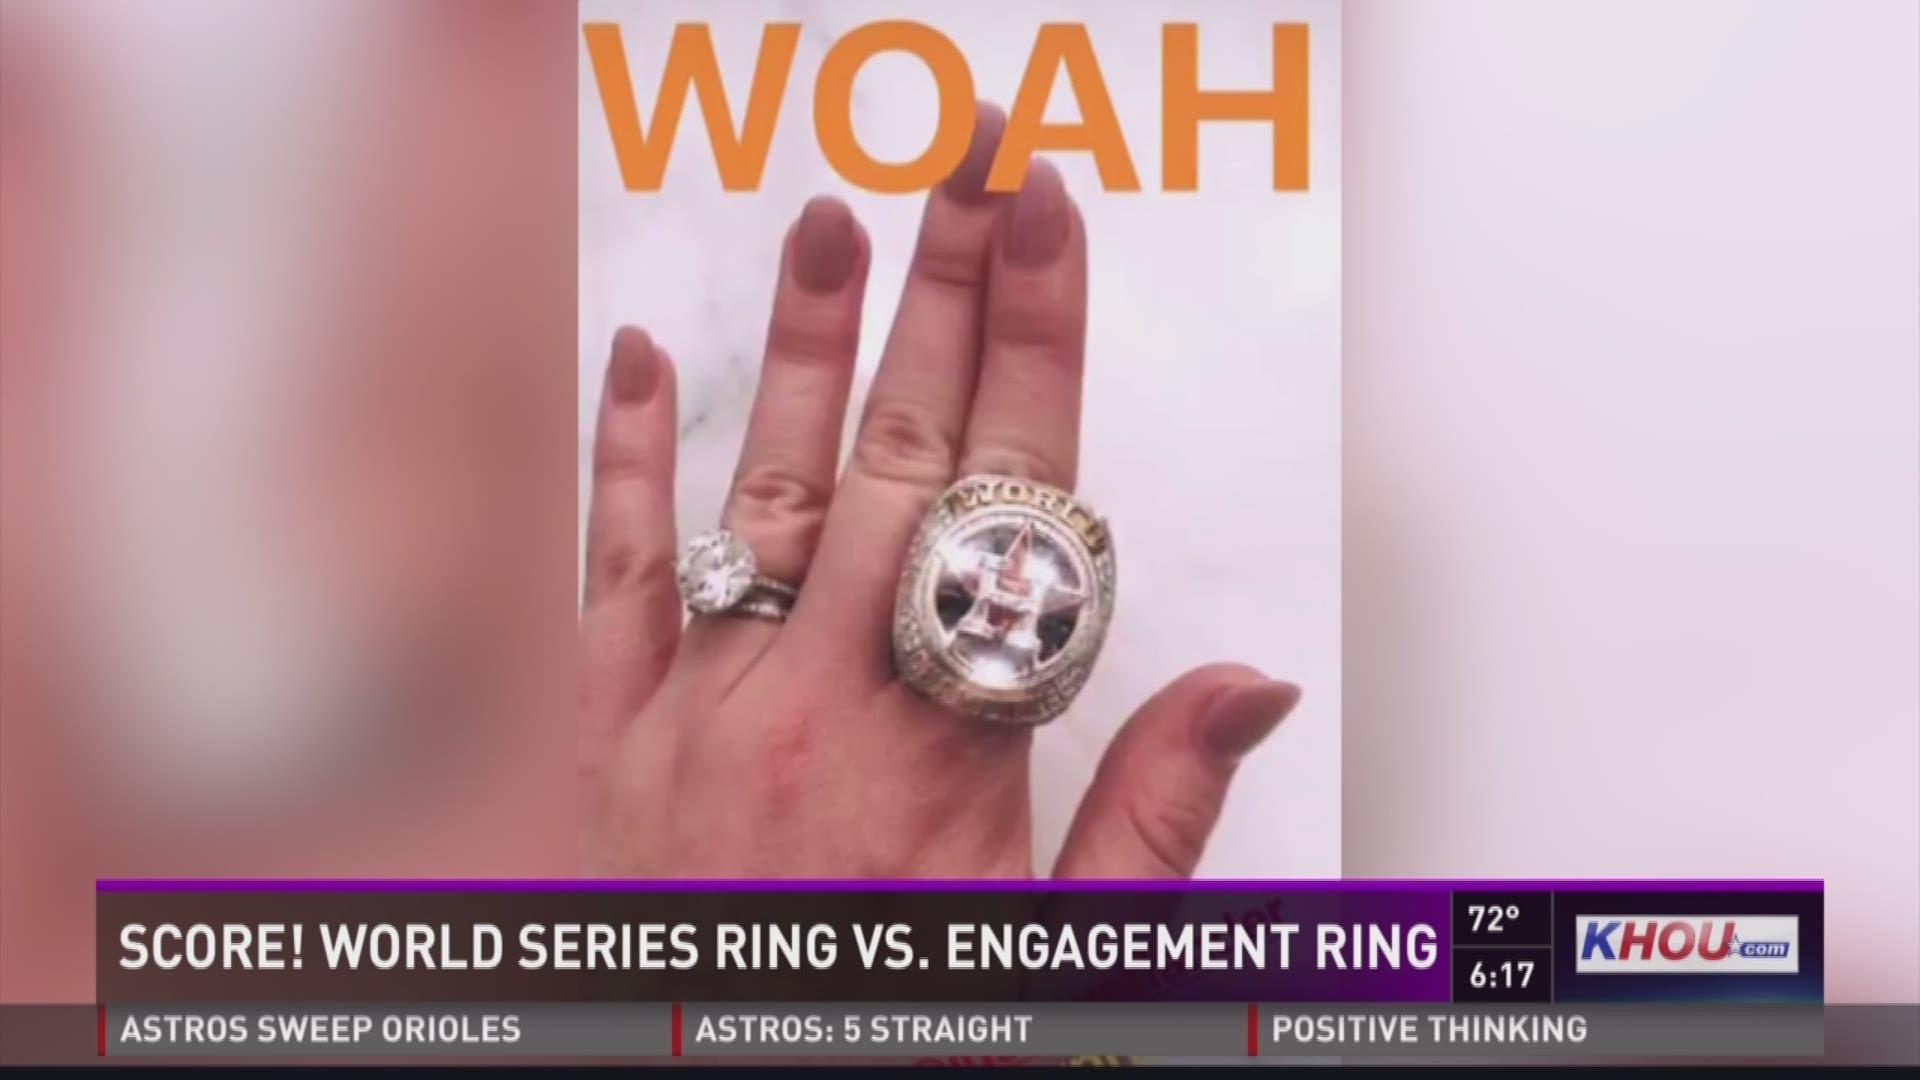 Kate Upton got a chance to try on husband Justin Verlander's new World Series bling this week.